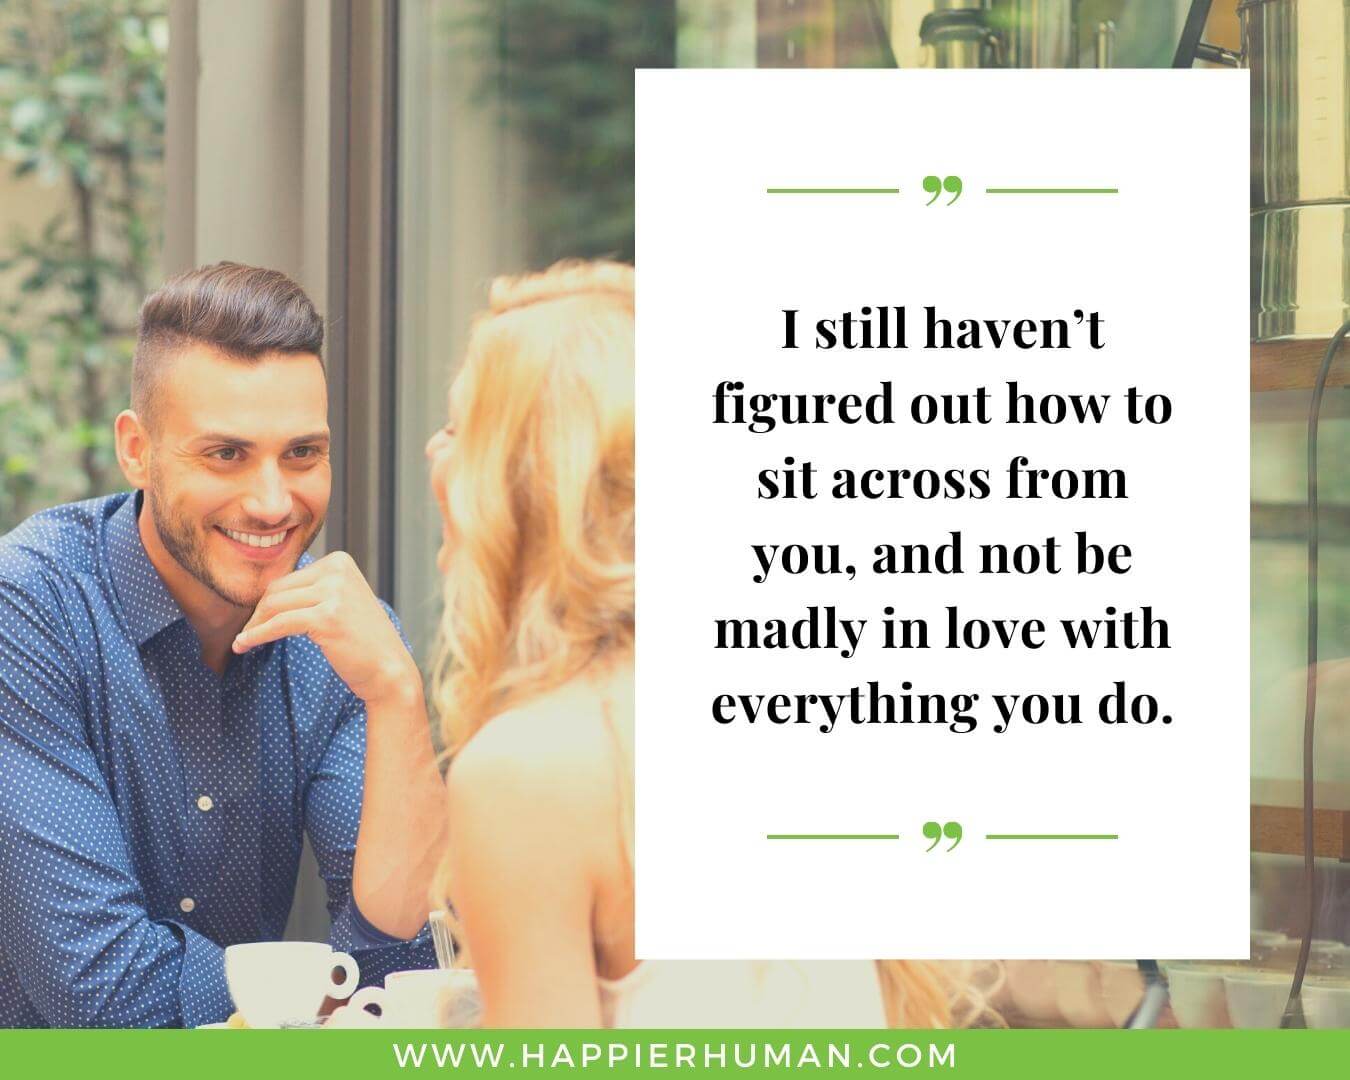 Madly in love quotes - “I still haven’t figured out how to sit across from you, and not be madly in love with everything you do.”